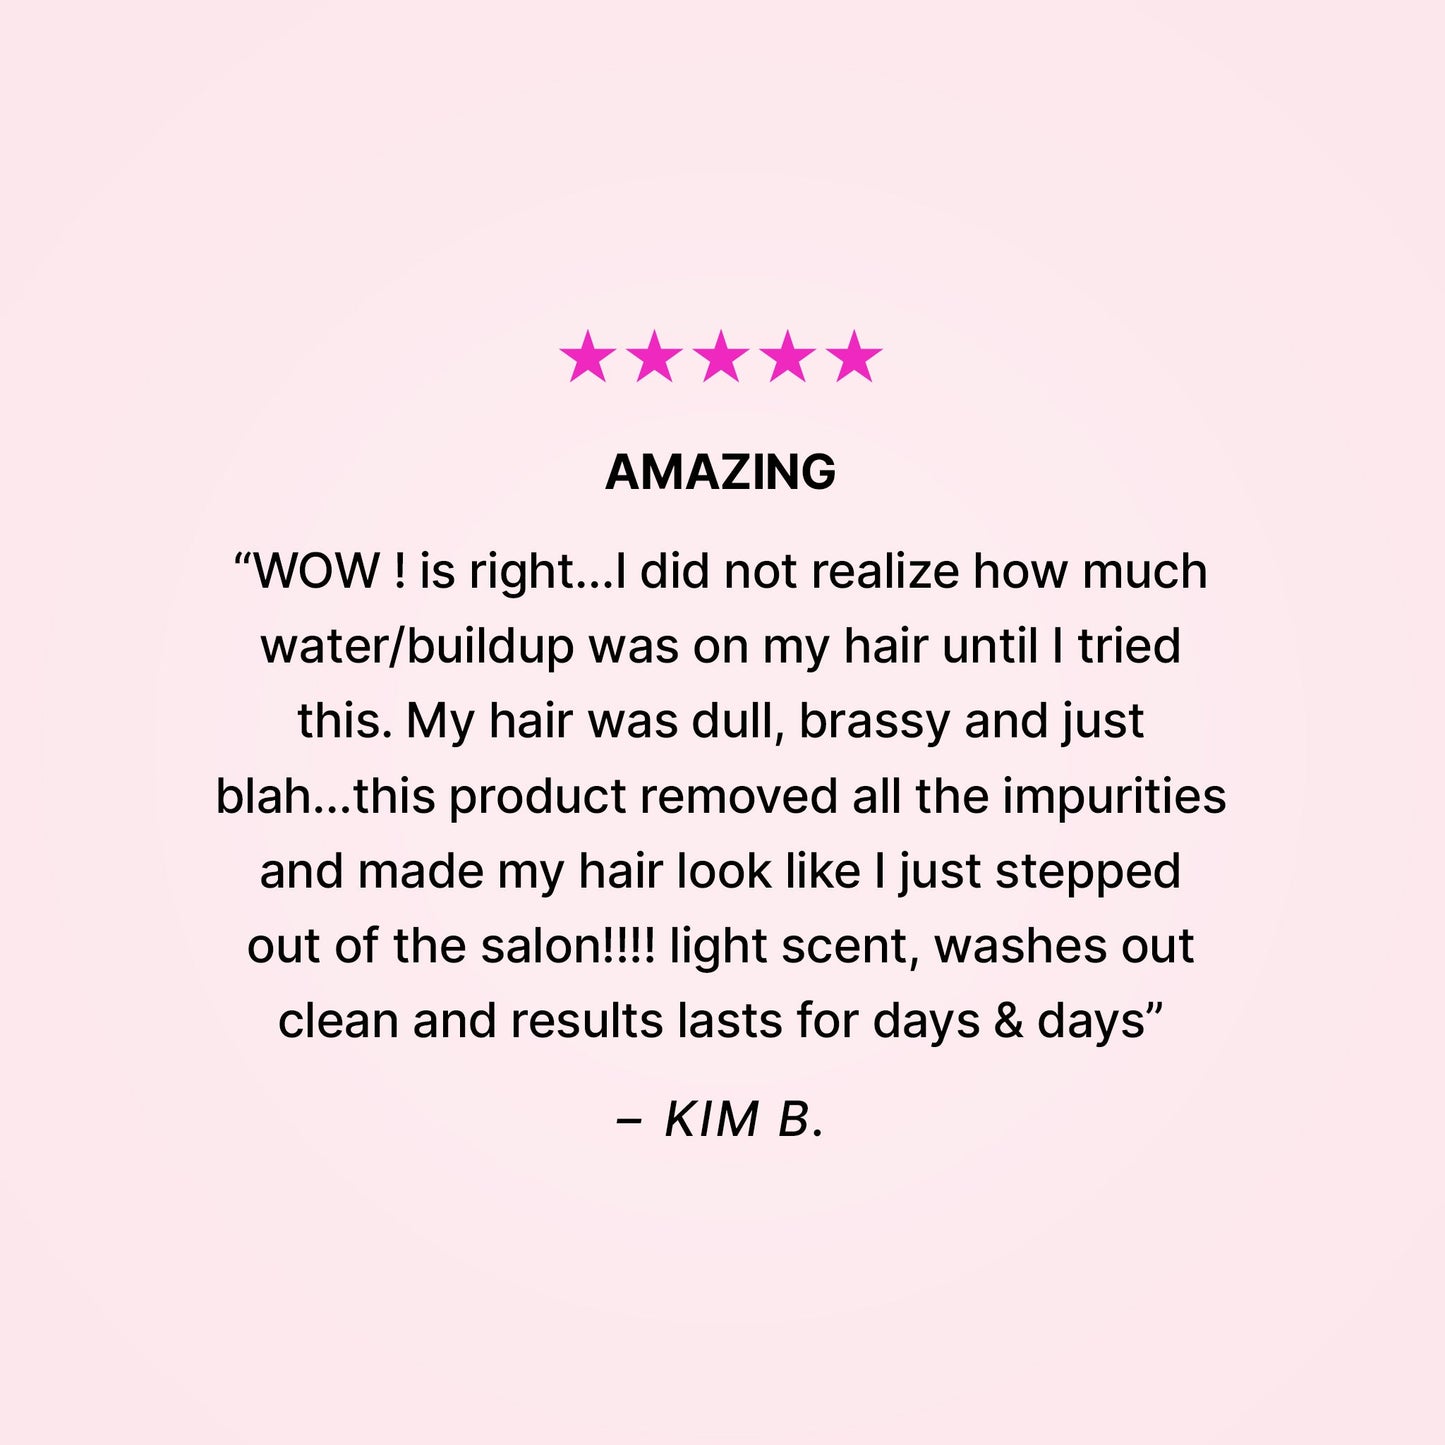 Five stars. Amazing. “WOW! is right… I did not realize how much water/buildup was on my hair until I tried this. My hair was dull, brassy and just blah… this product removed all the impurities and made my hair look like I just stepped out of the salon!!! Light scent, washes out clean and results last for days & days” - Kim B. 